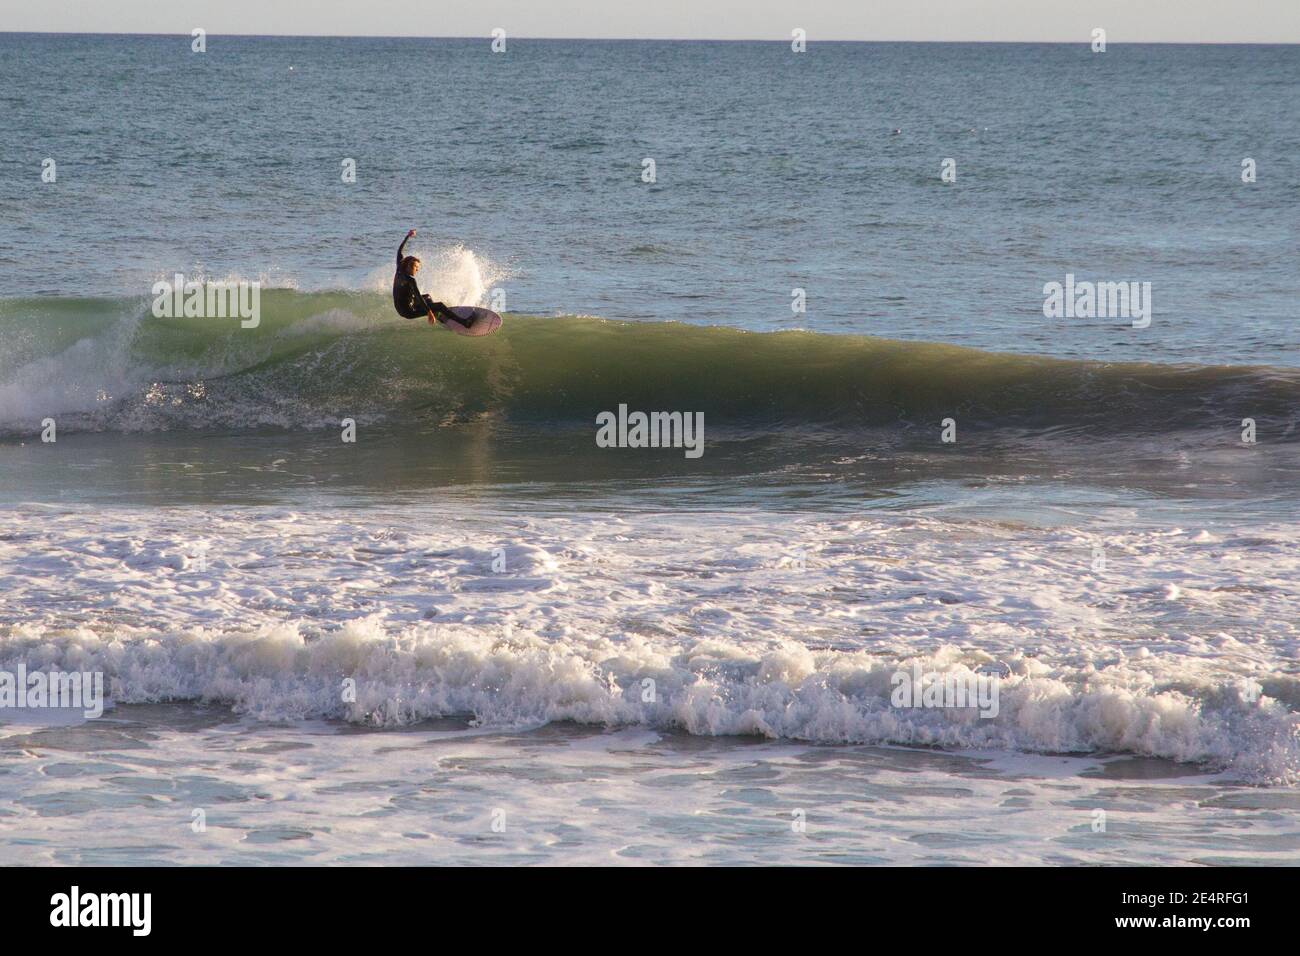 Surfer surfing wave jumping on surf board. Mallorca Spain Stock Photo